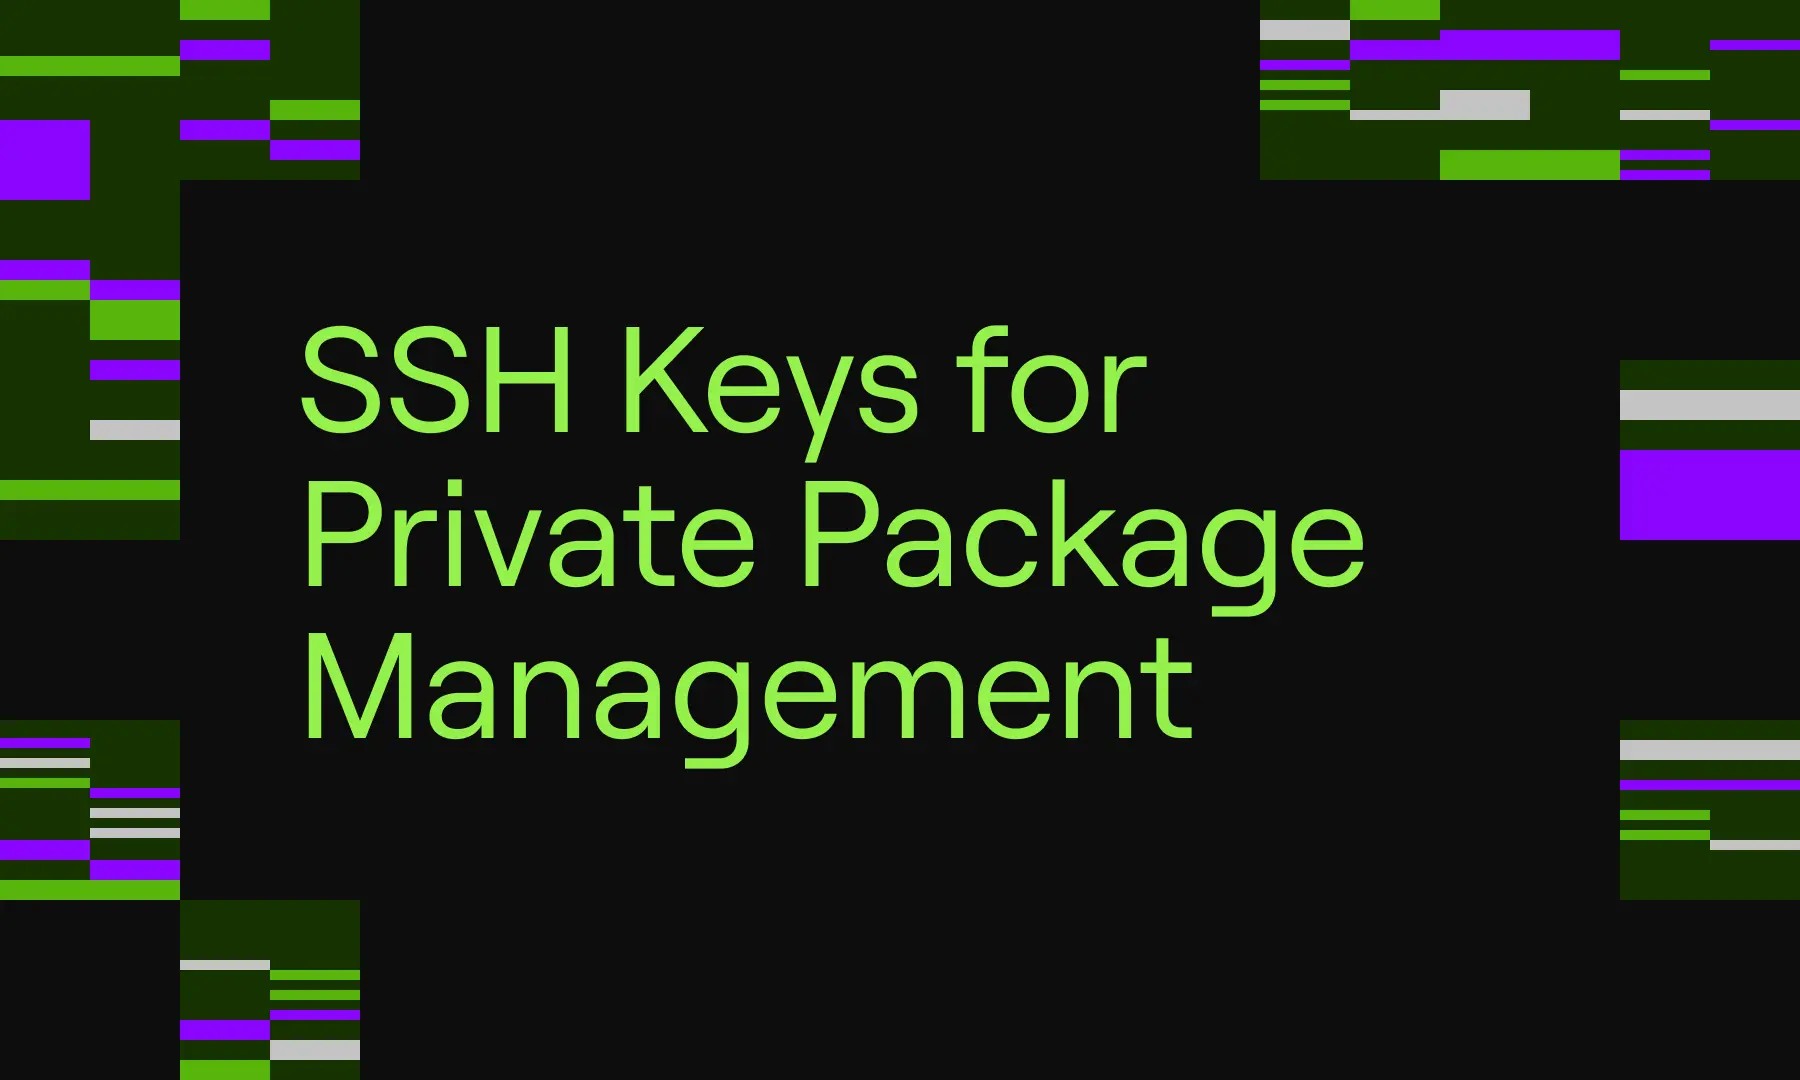 Using SSH keys for Private Package Management